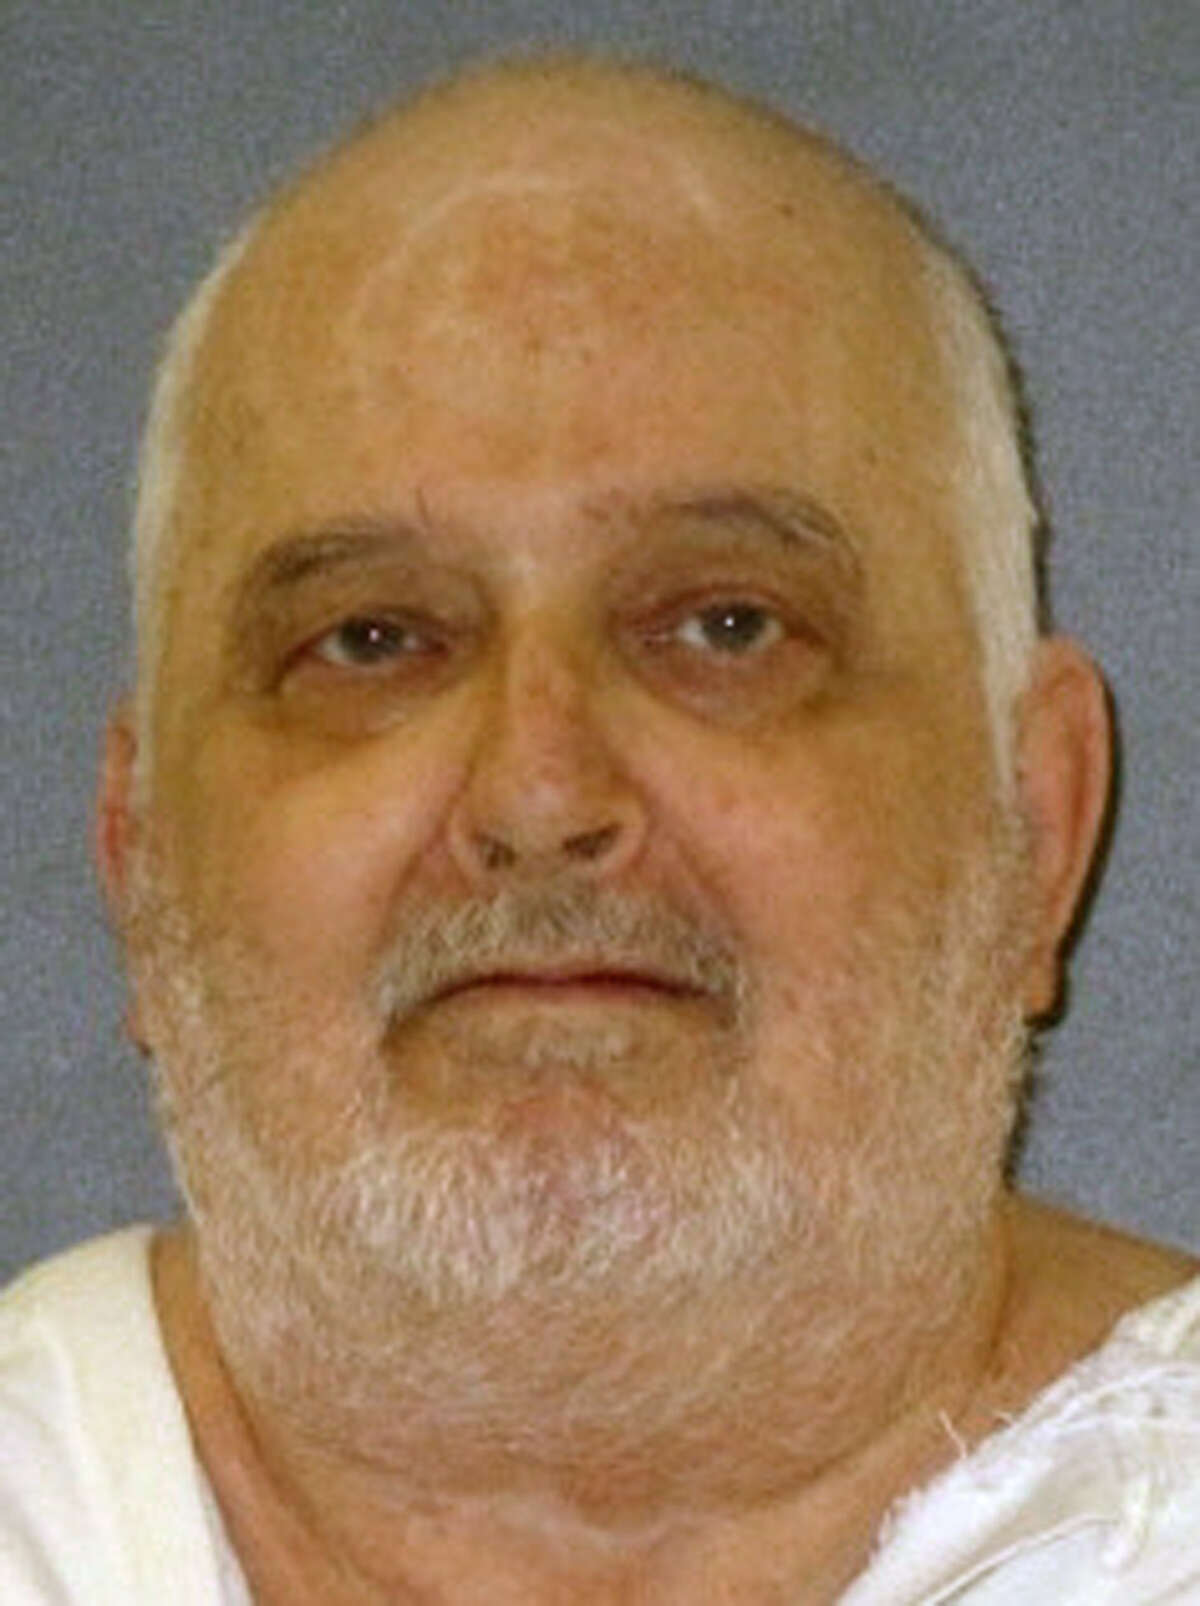 This undated photo provided by the Texas Department of Criminal Justice shows death row inmate Danny Bible. The U.S. Supreme Court has refused an appeal from Bible on death row for the 1979 slaying of a woman who went to his house in Houston to use a telephone and was found later stabbed 11 times with an ice pick, raped and dumped on the bank of a bayou. The high court, without comment Tuesday, Oct. 11, 2016, rejected the appeal of 65-year-old Bible. (Texas Department of Criminal Justice via AP)